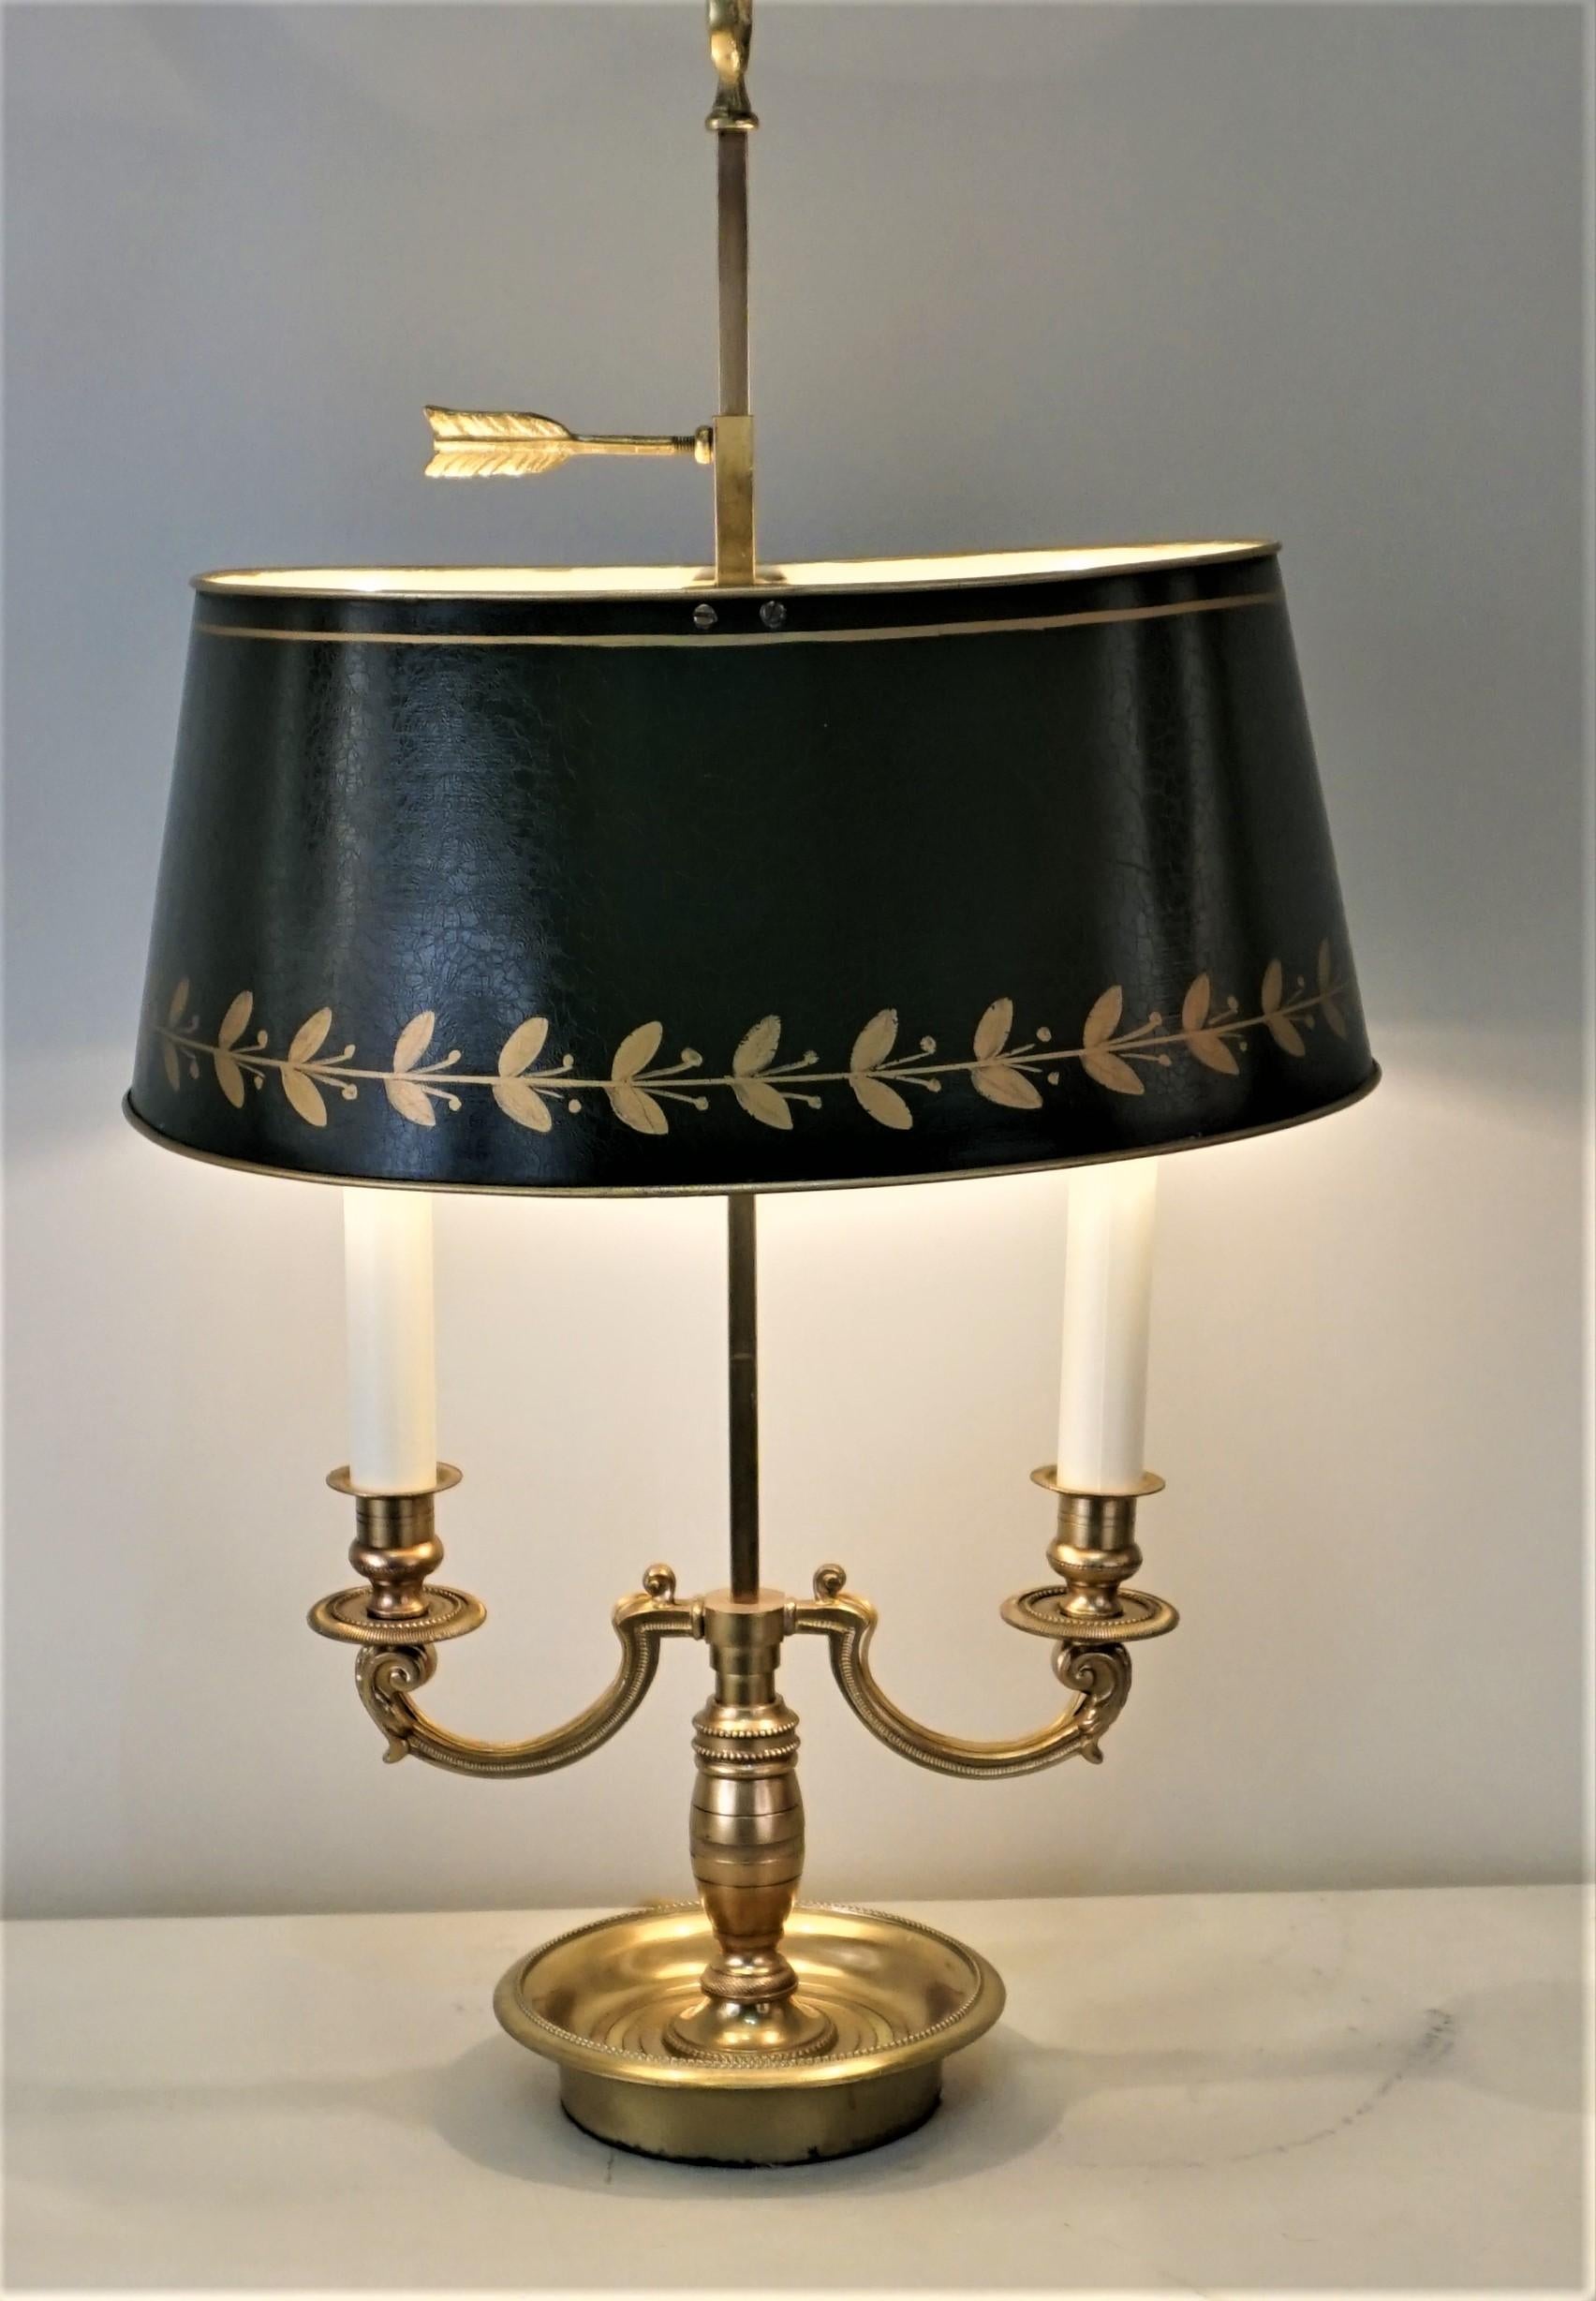 A French Empire style Bouillotte table lamp with green lacquered lampshade
double lights 60 watt each.